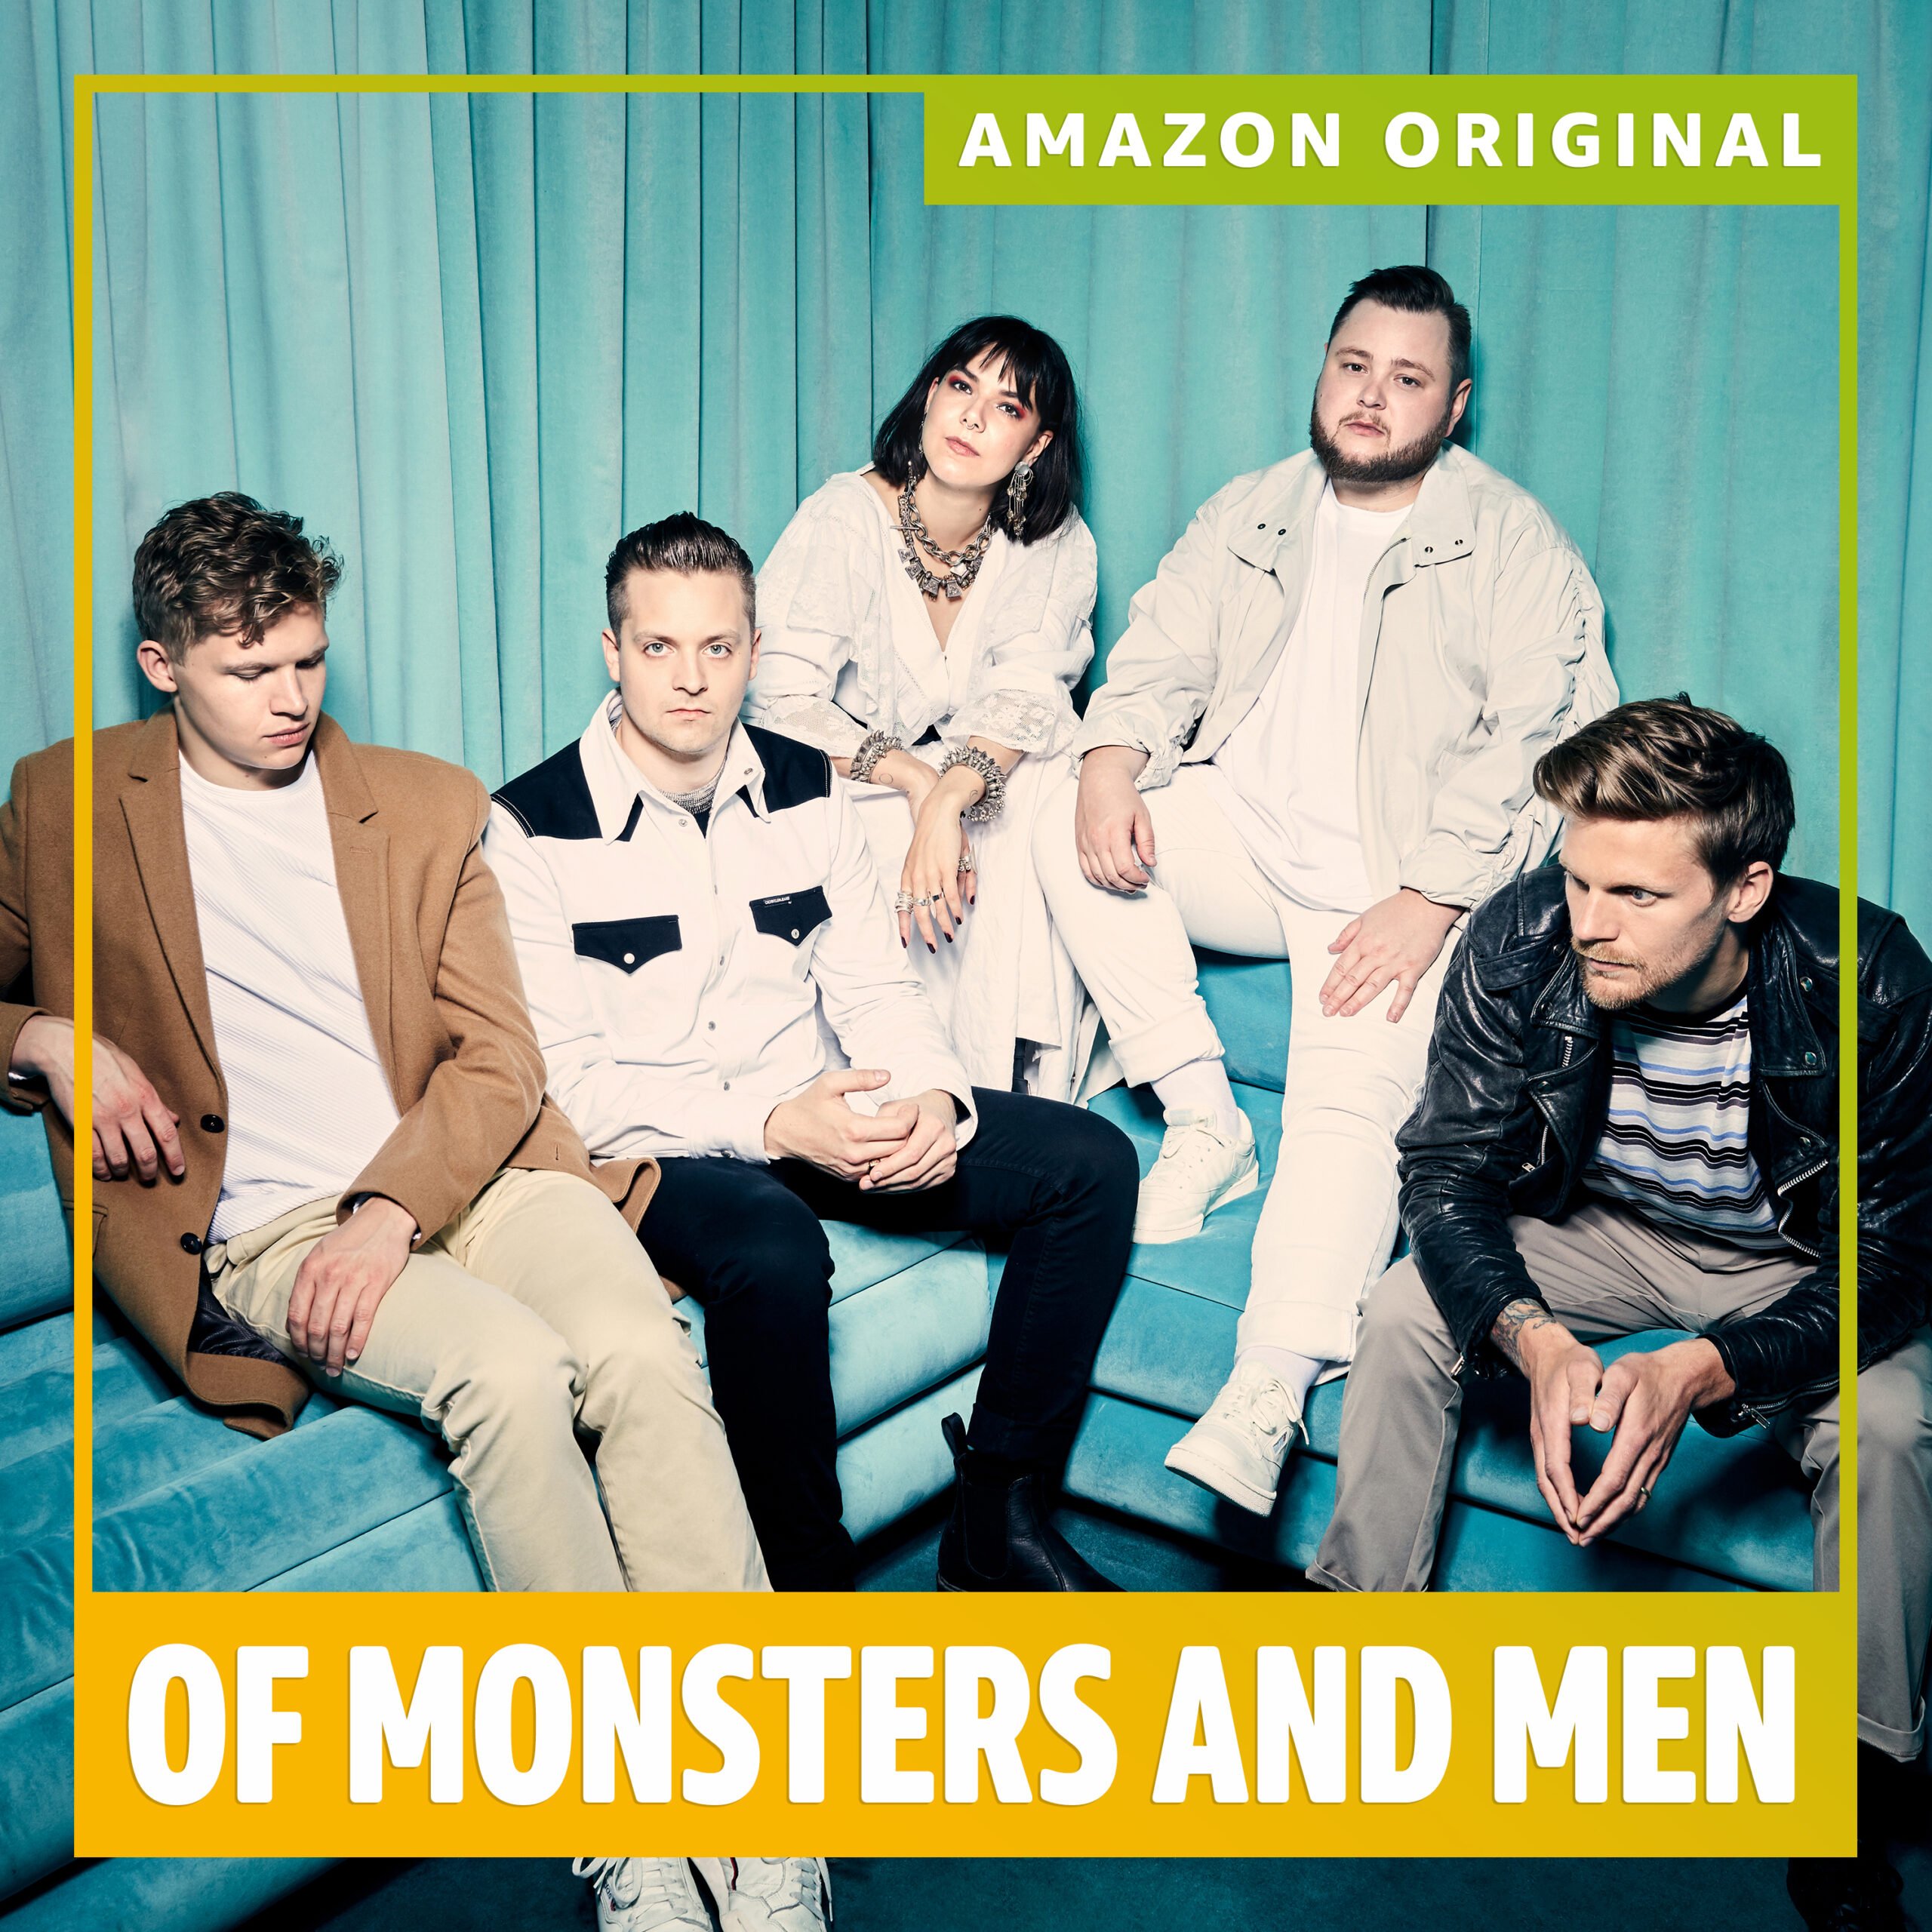 Of monsters and men, 360 MAGAZINE